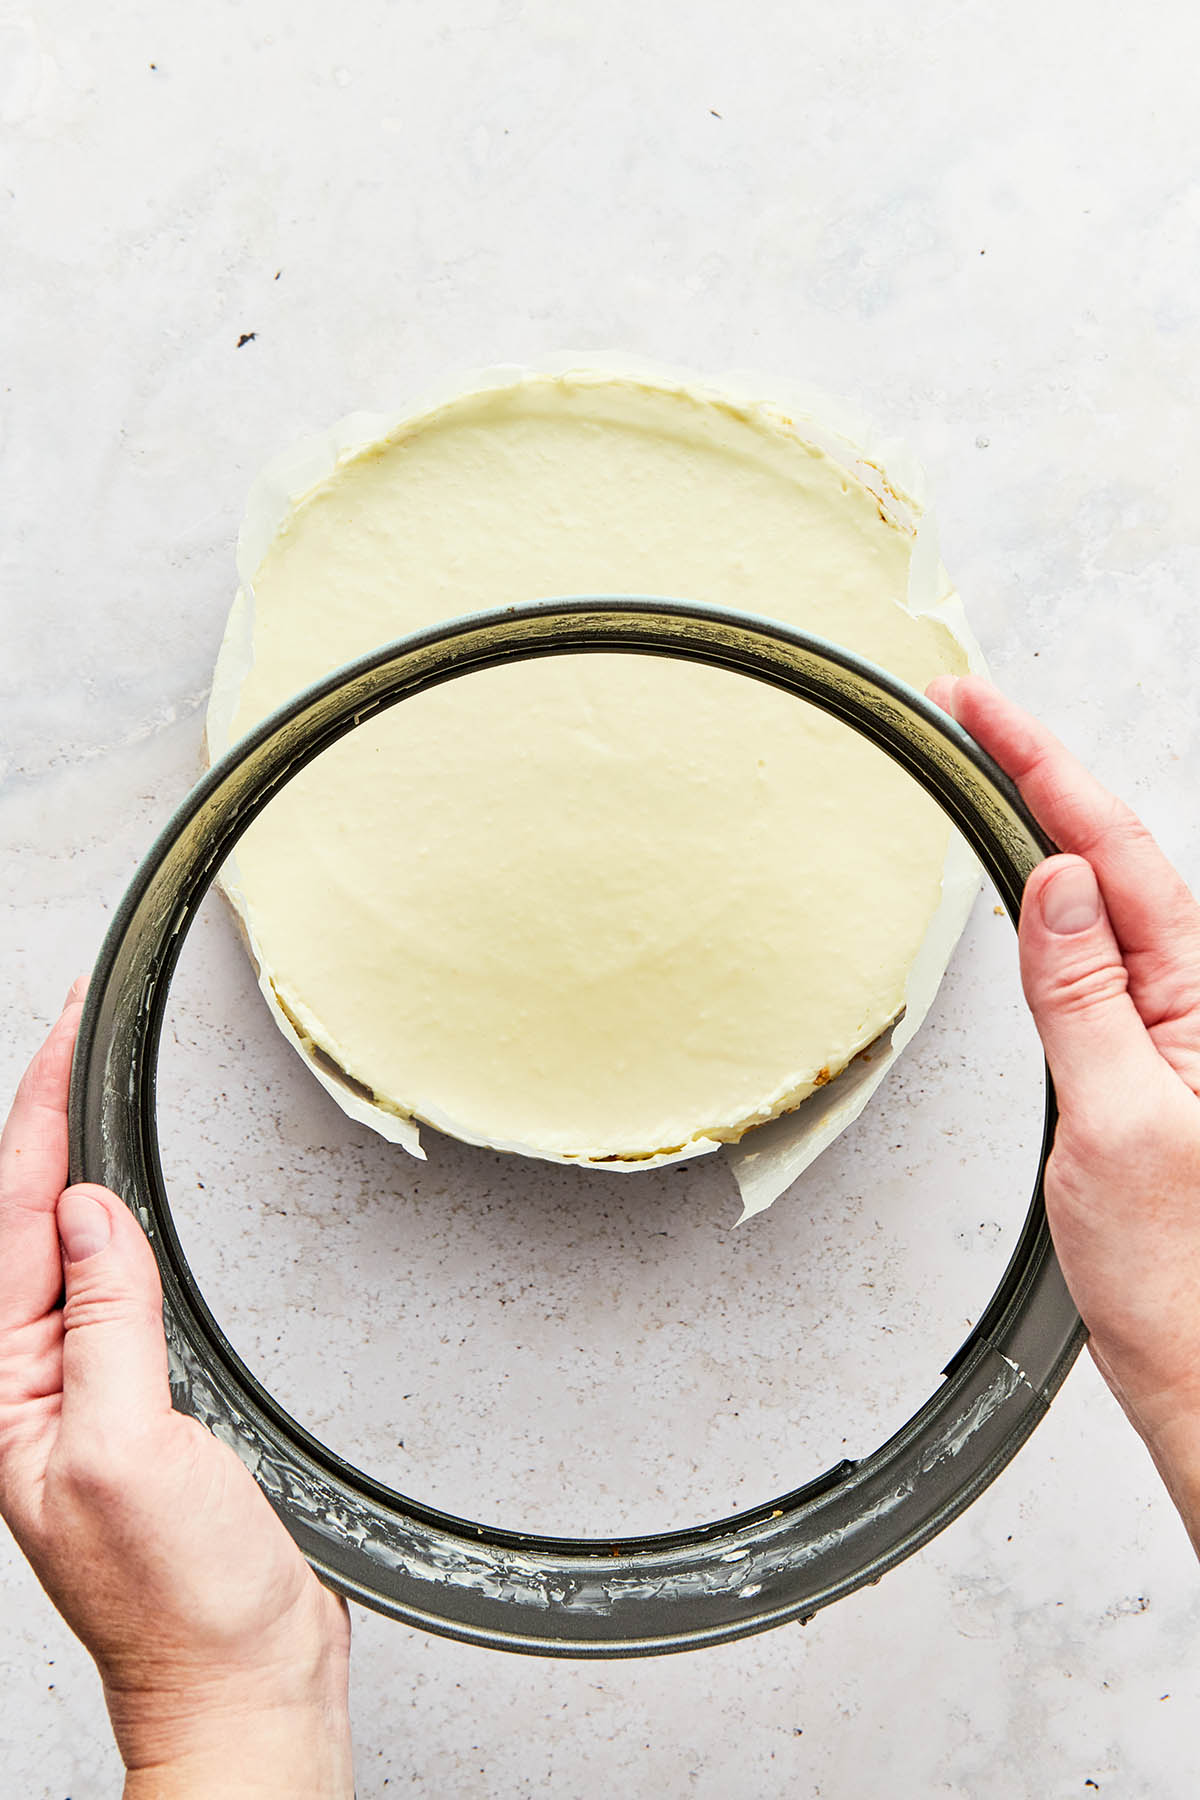 Hands removing the metal collar of a springform tin from a cheesecake.